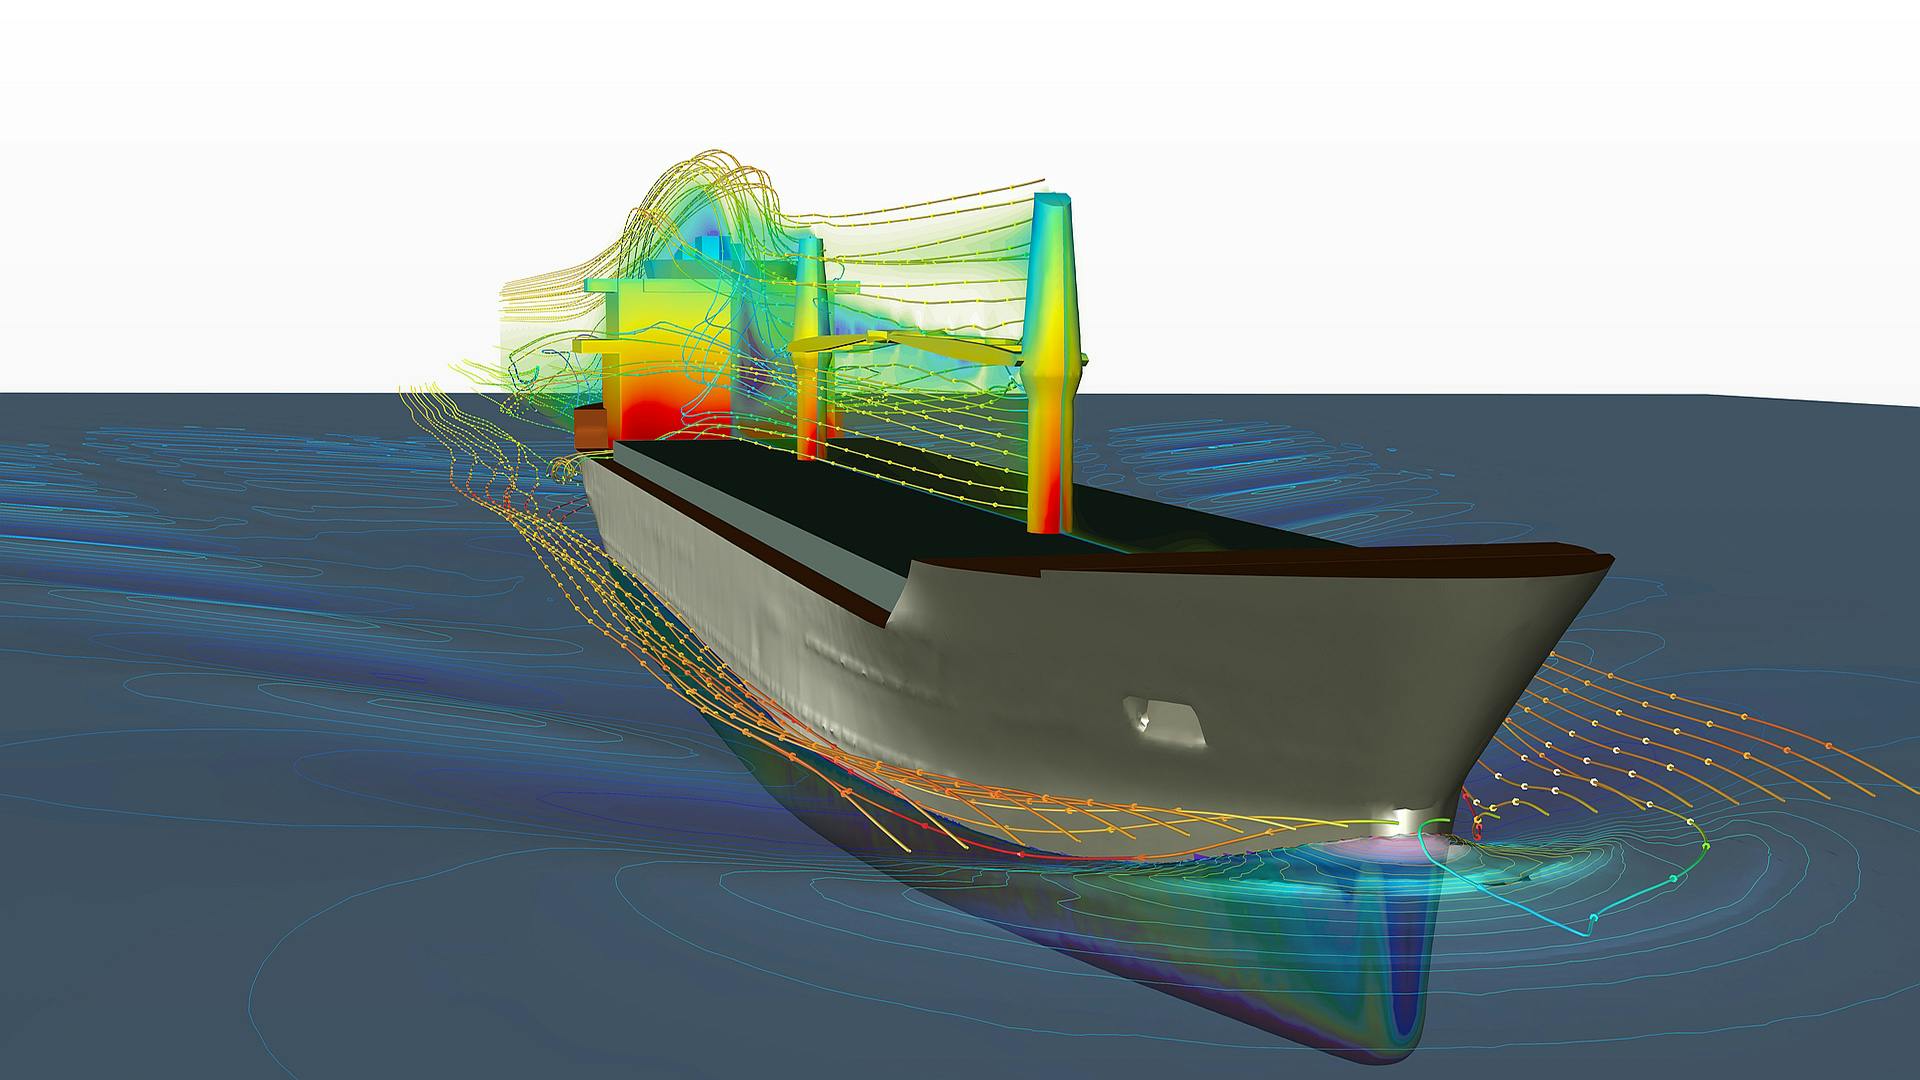 Designing ships for future challenges: a paradigm shift in vessel design